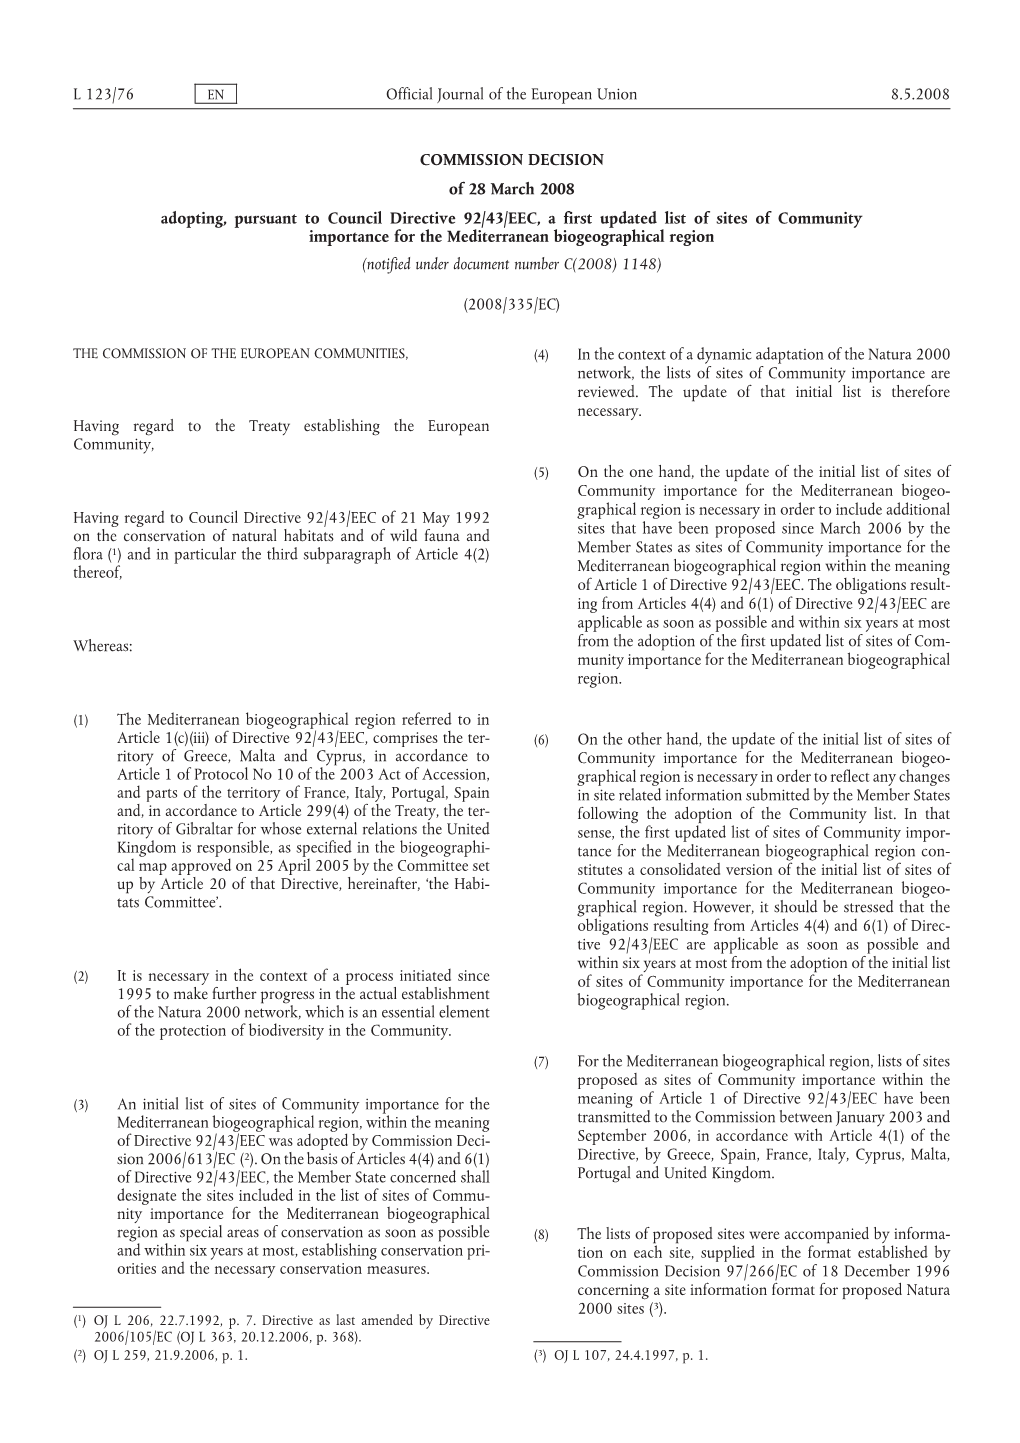 COMMISSION DECISION of 28 March 2008 Adopting, Pursuant to Council